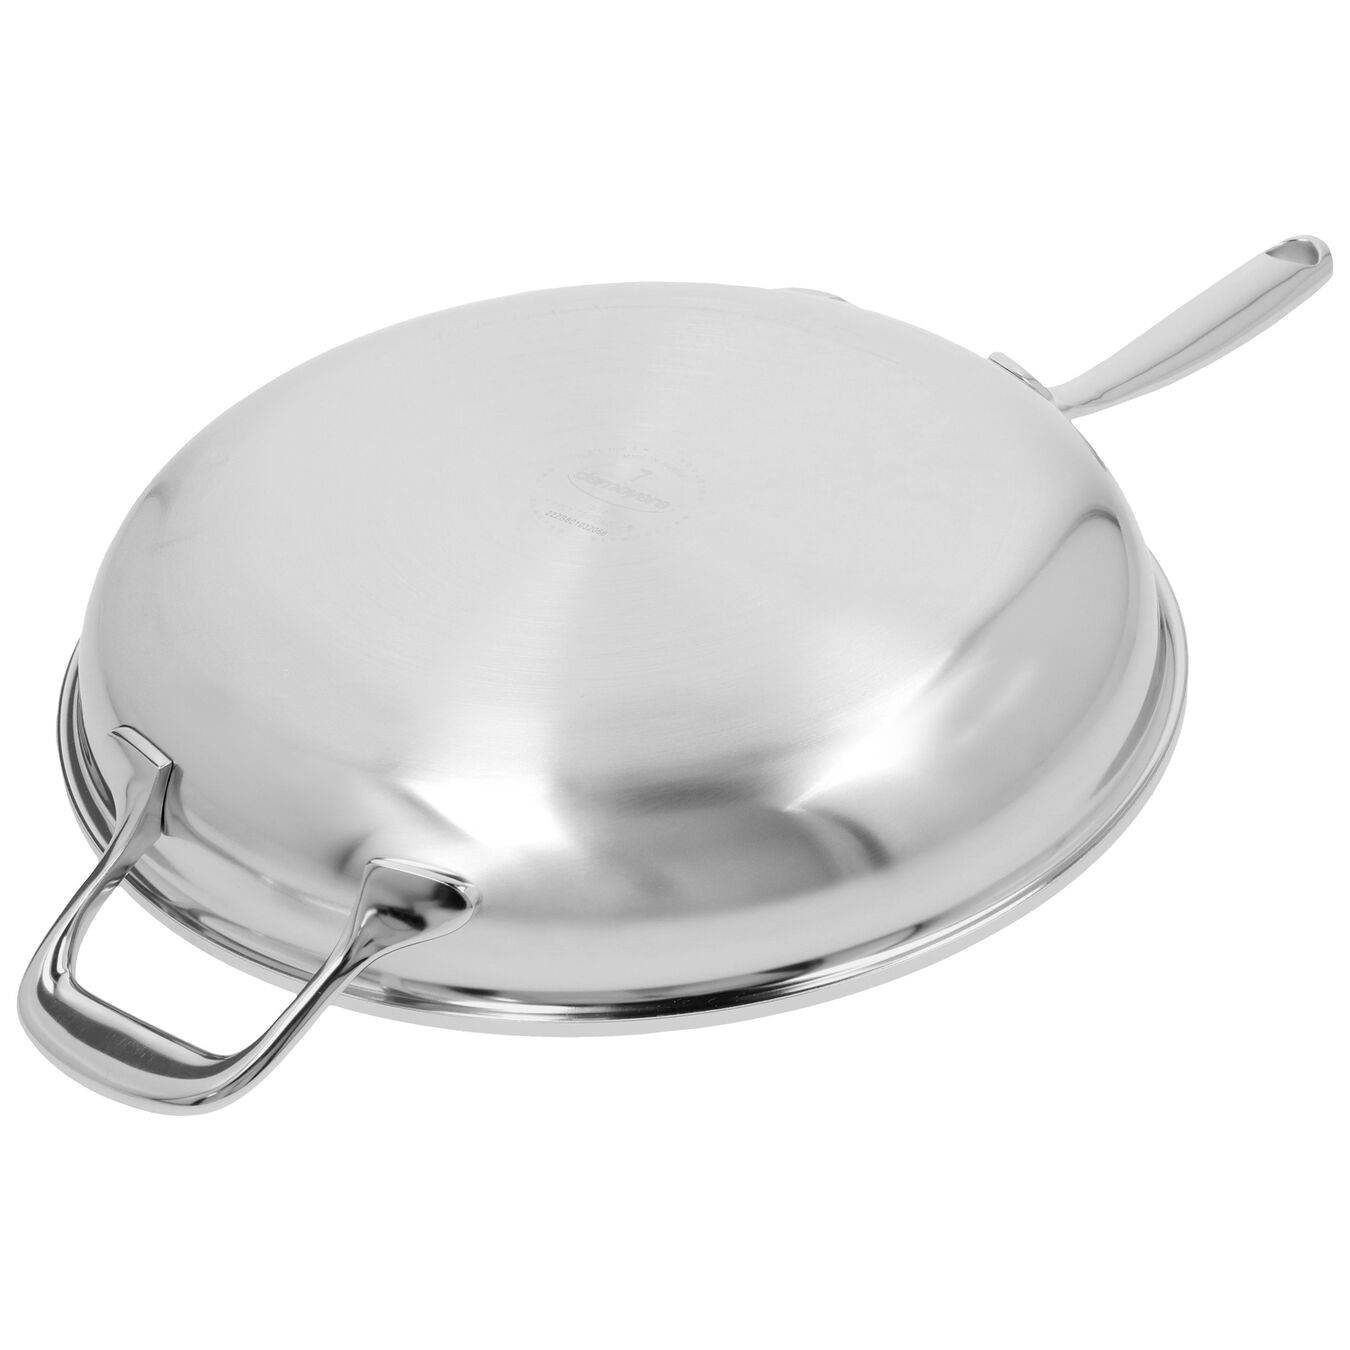 Demeyere Proline 7 Collection 28 cm / 11" 18/10 Stainless Steel Frying Pan Base